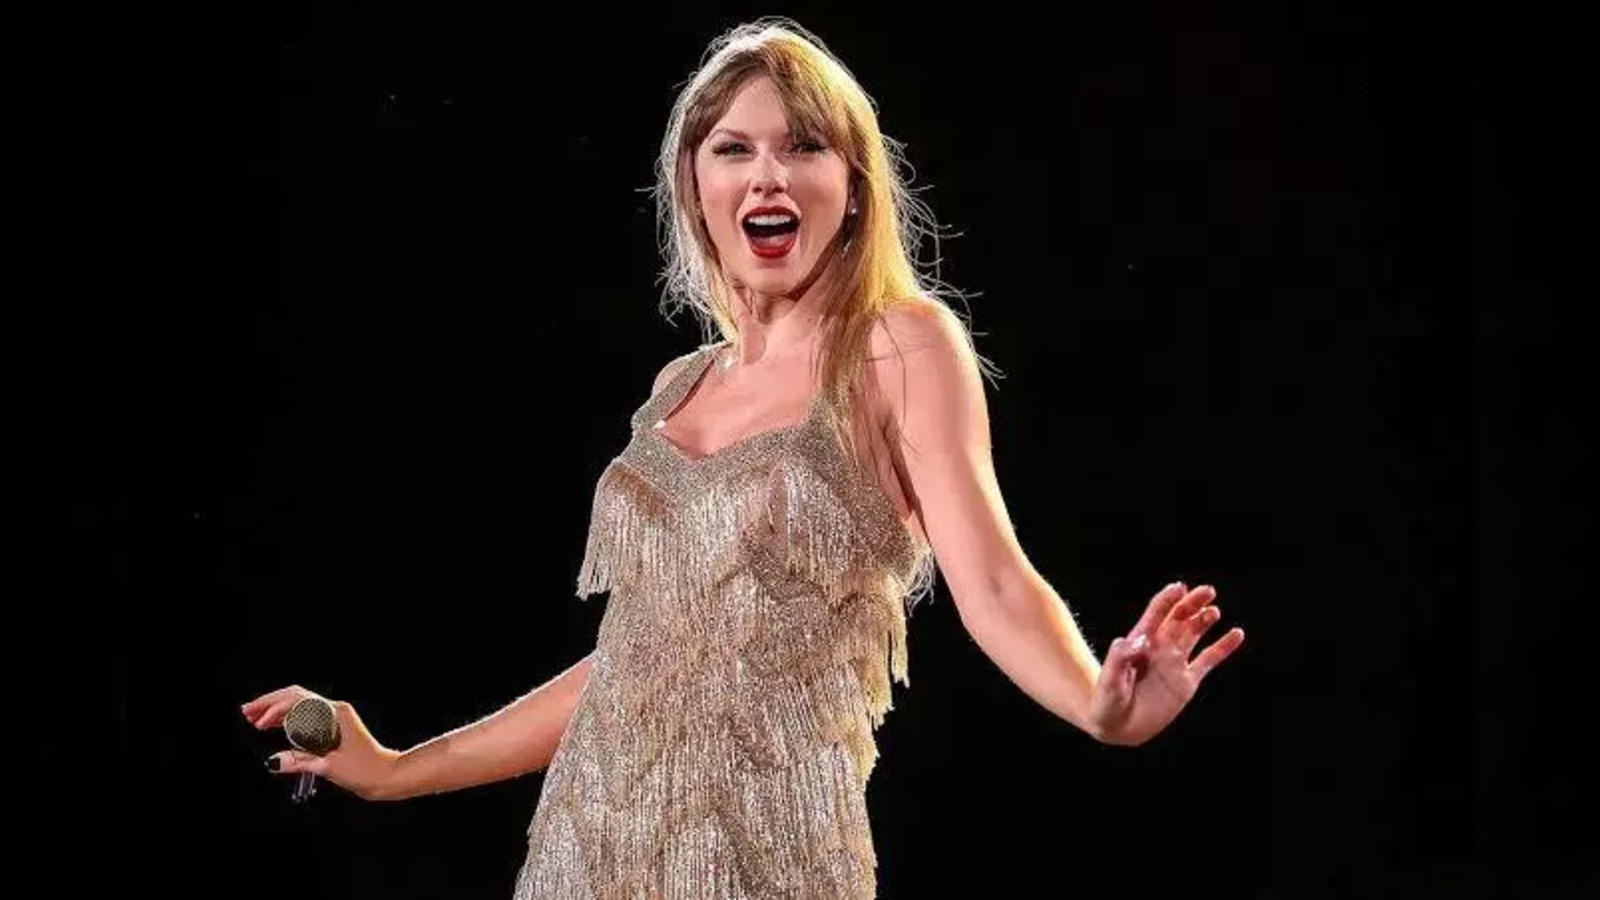 Taylor Swift feels 'protected and cherished' by 'true gentleman